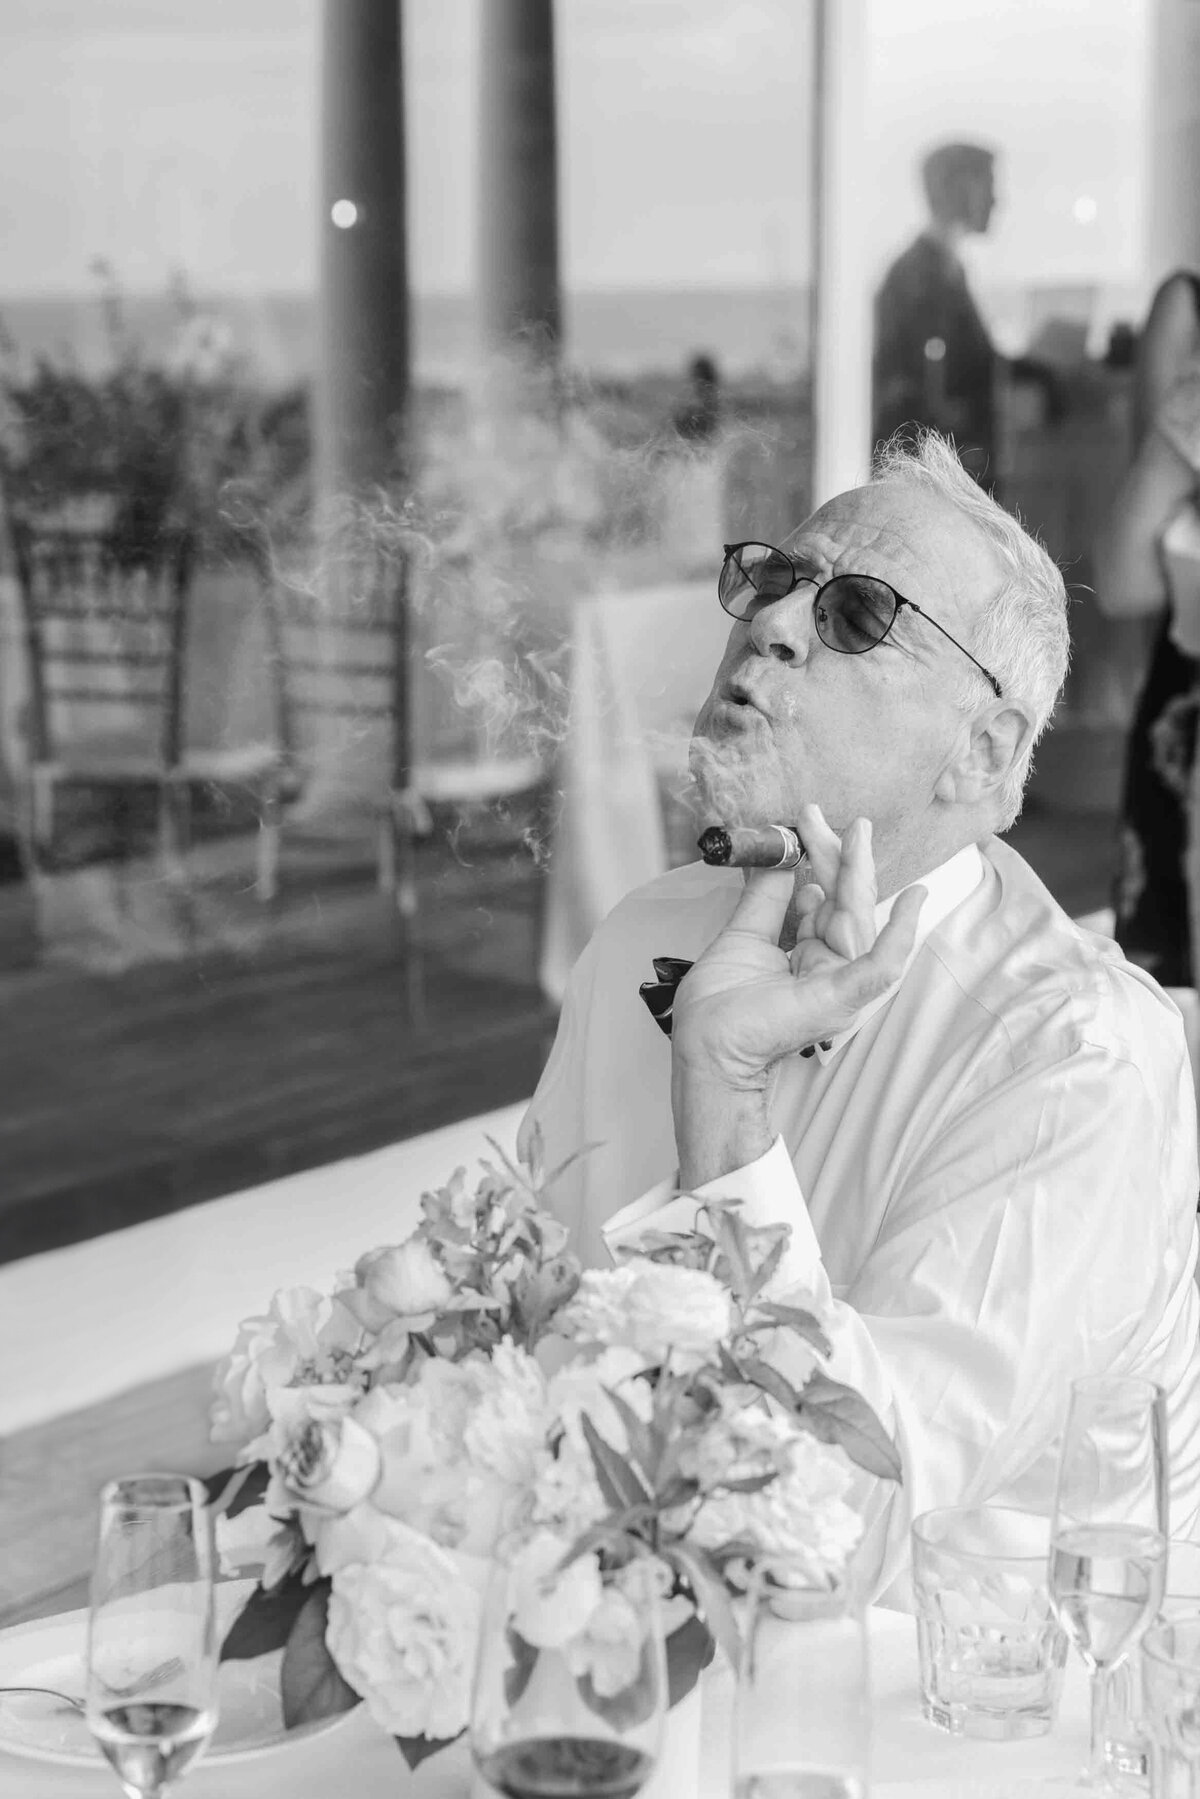 grandfather of the groom smoking a cigar and blowing smoke